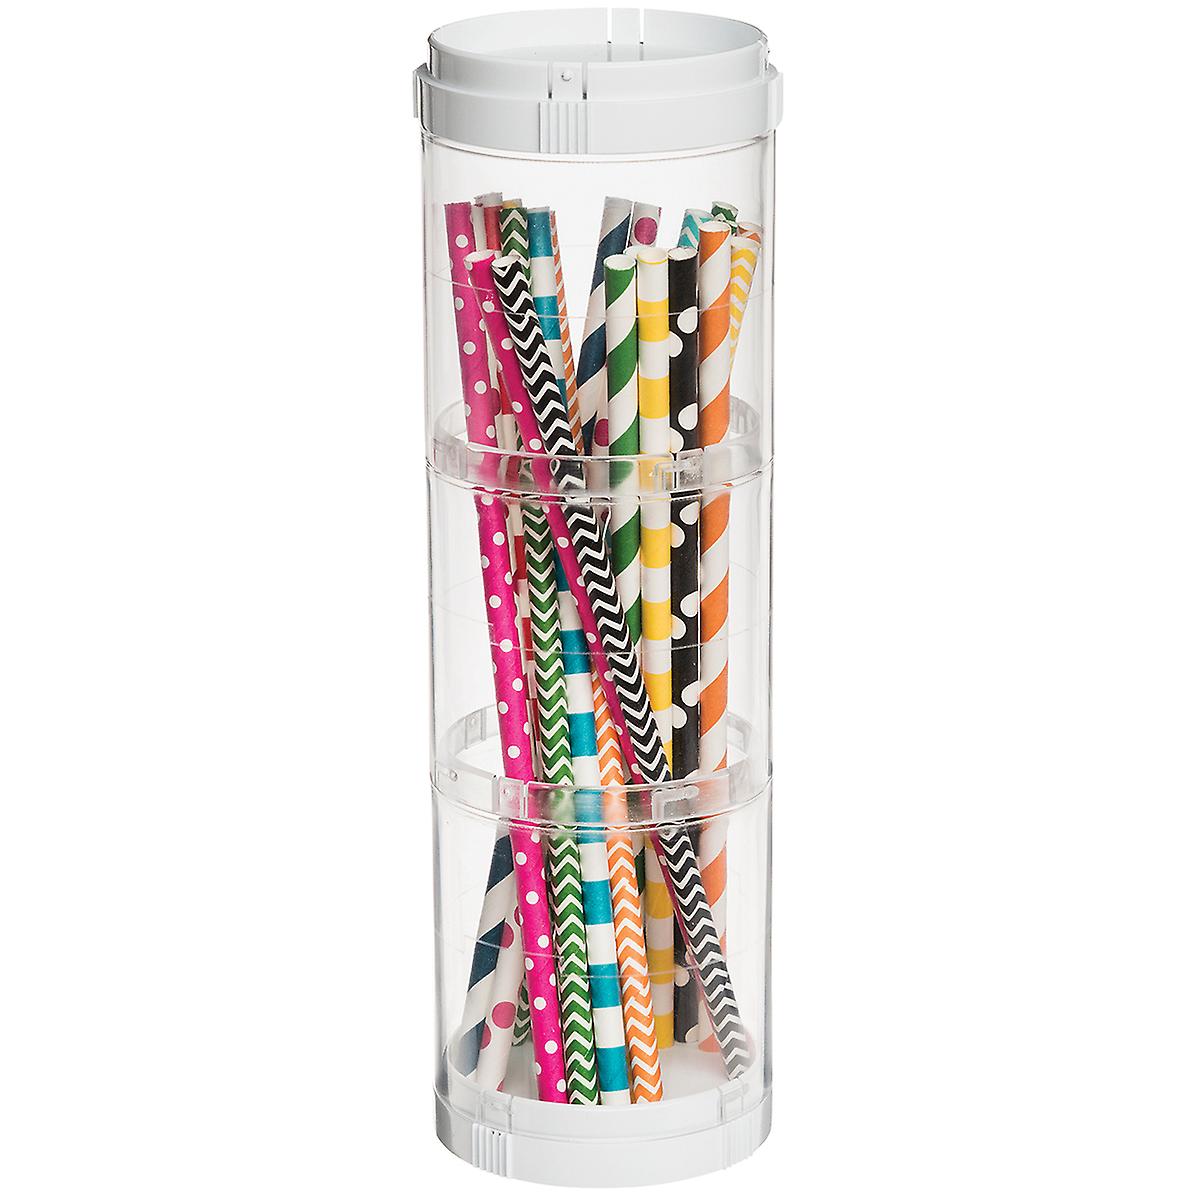 Picture of Deflecto 20101CR White & Clear Stacking Storage Organizer